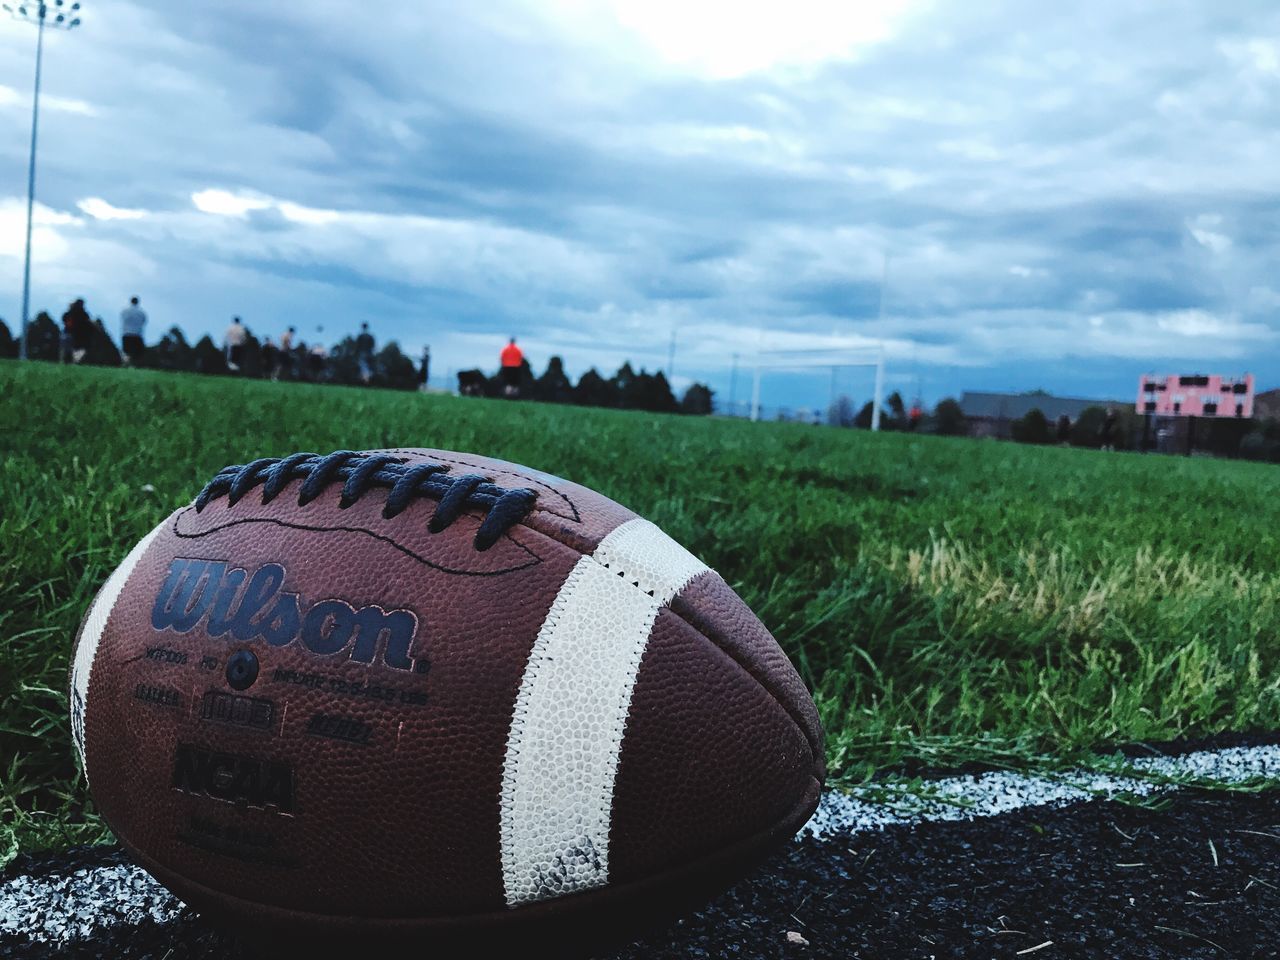 cloud - sky, grass, sky, sport, field, day, no people, outdoors, nature, close-up, american football - sport